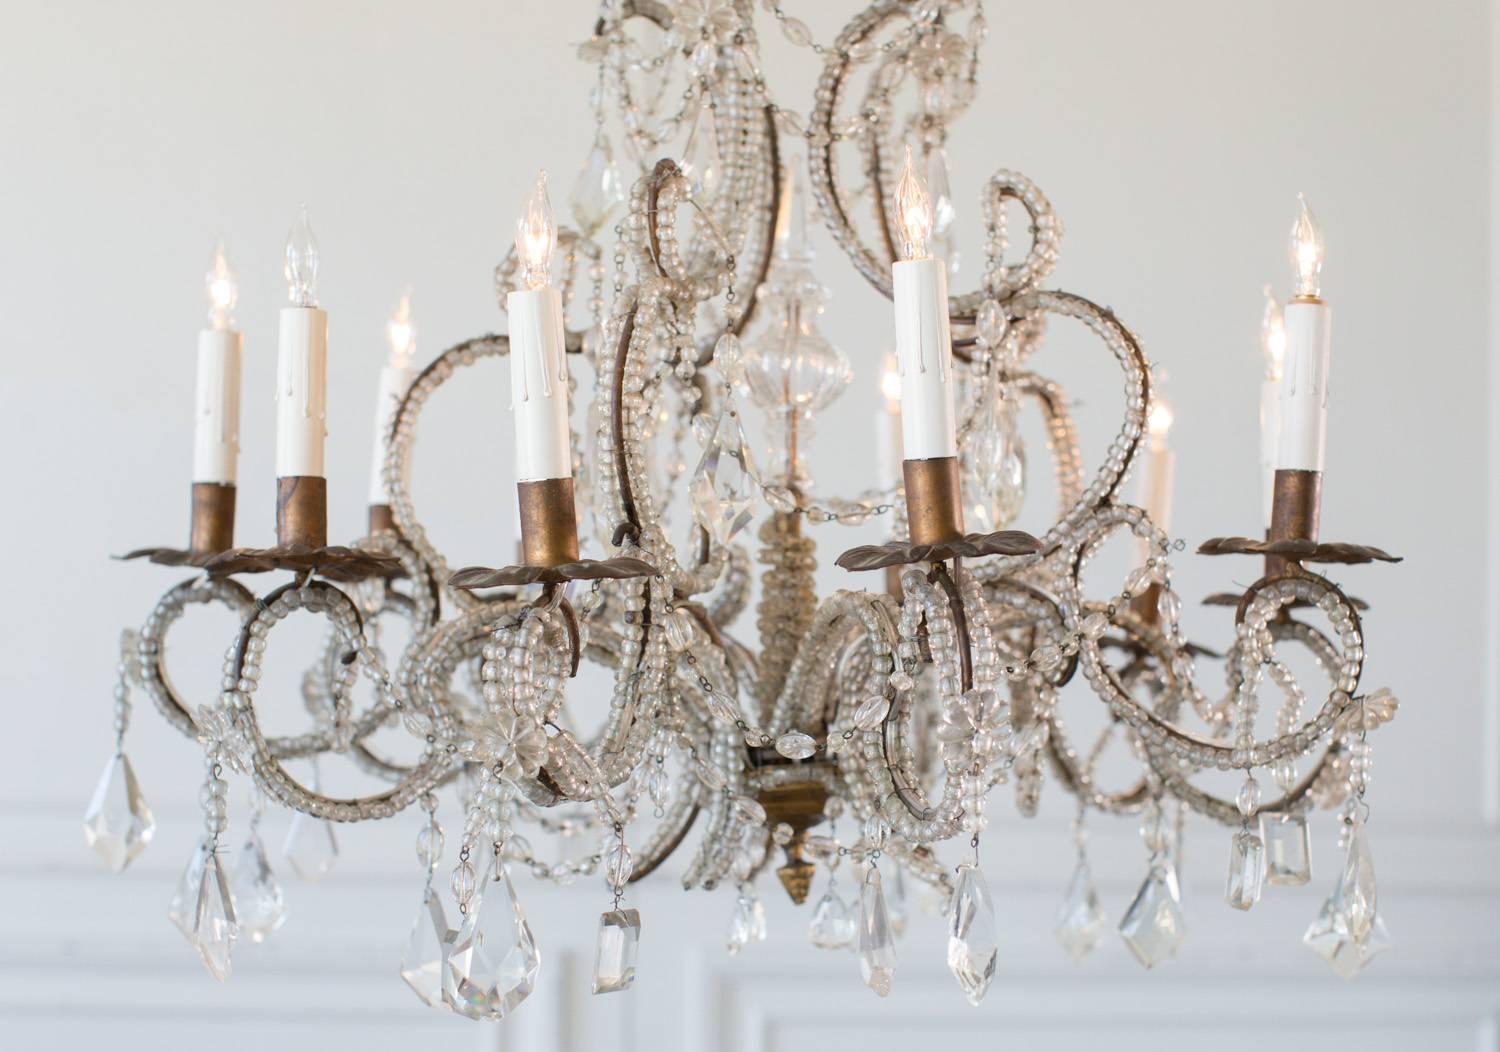 Striking, beaded antique chandelier with eight arms. The frame of this unique light is entirely strung with an abundance of small, glass beads that Cascade from top to bottom. A multitude of crystal shapes enhance the complexity and grace of this